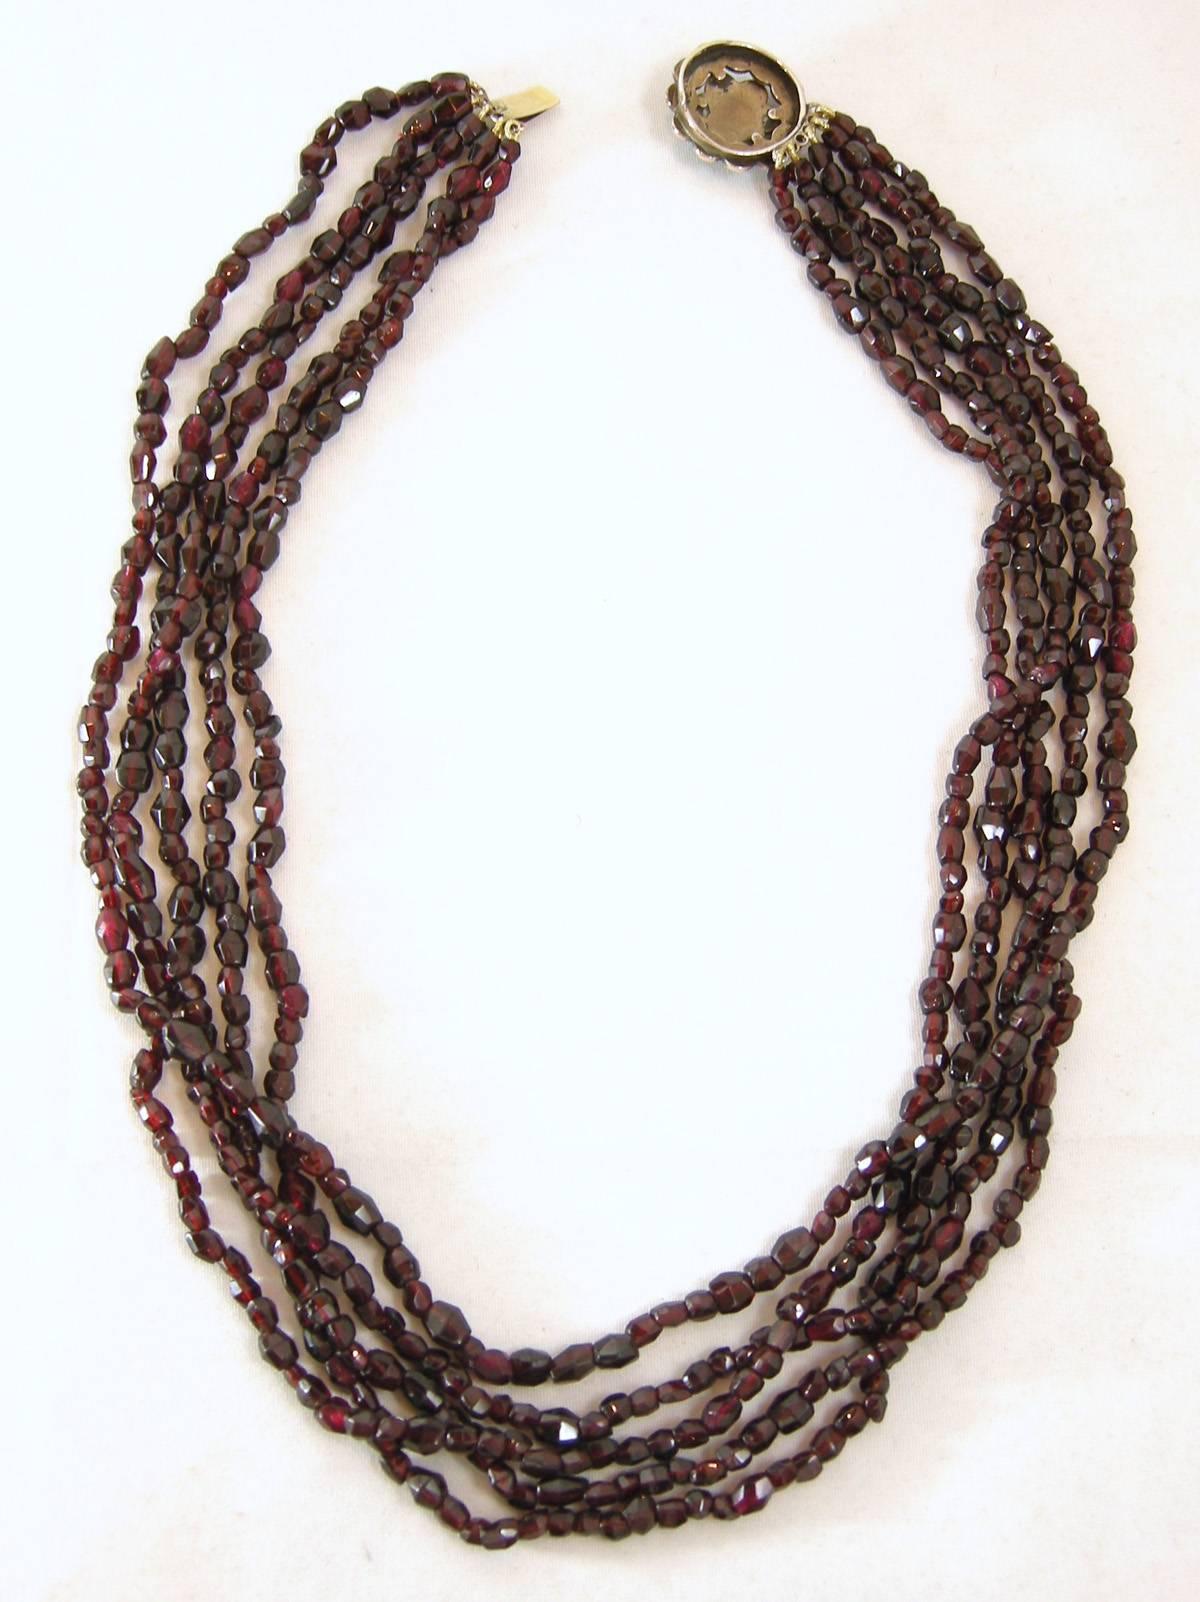 This vintage Victorian five strand choker is made of deep crimson garnet beads . It is accented with a flower in the center.  It is made of sterling silver over a gold vermeil and has a slide in clasp. The necklace measures 16” x 3/8”.  It is in